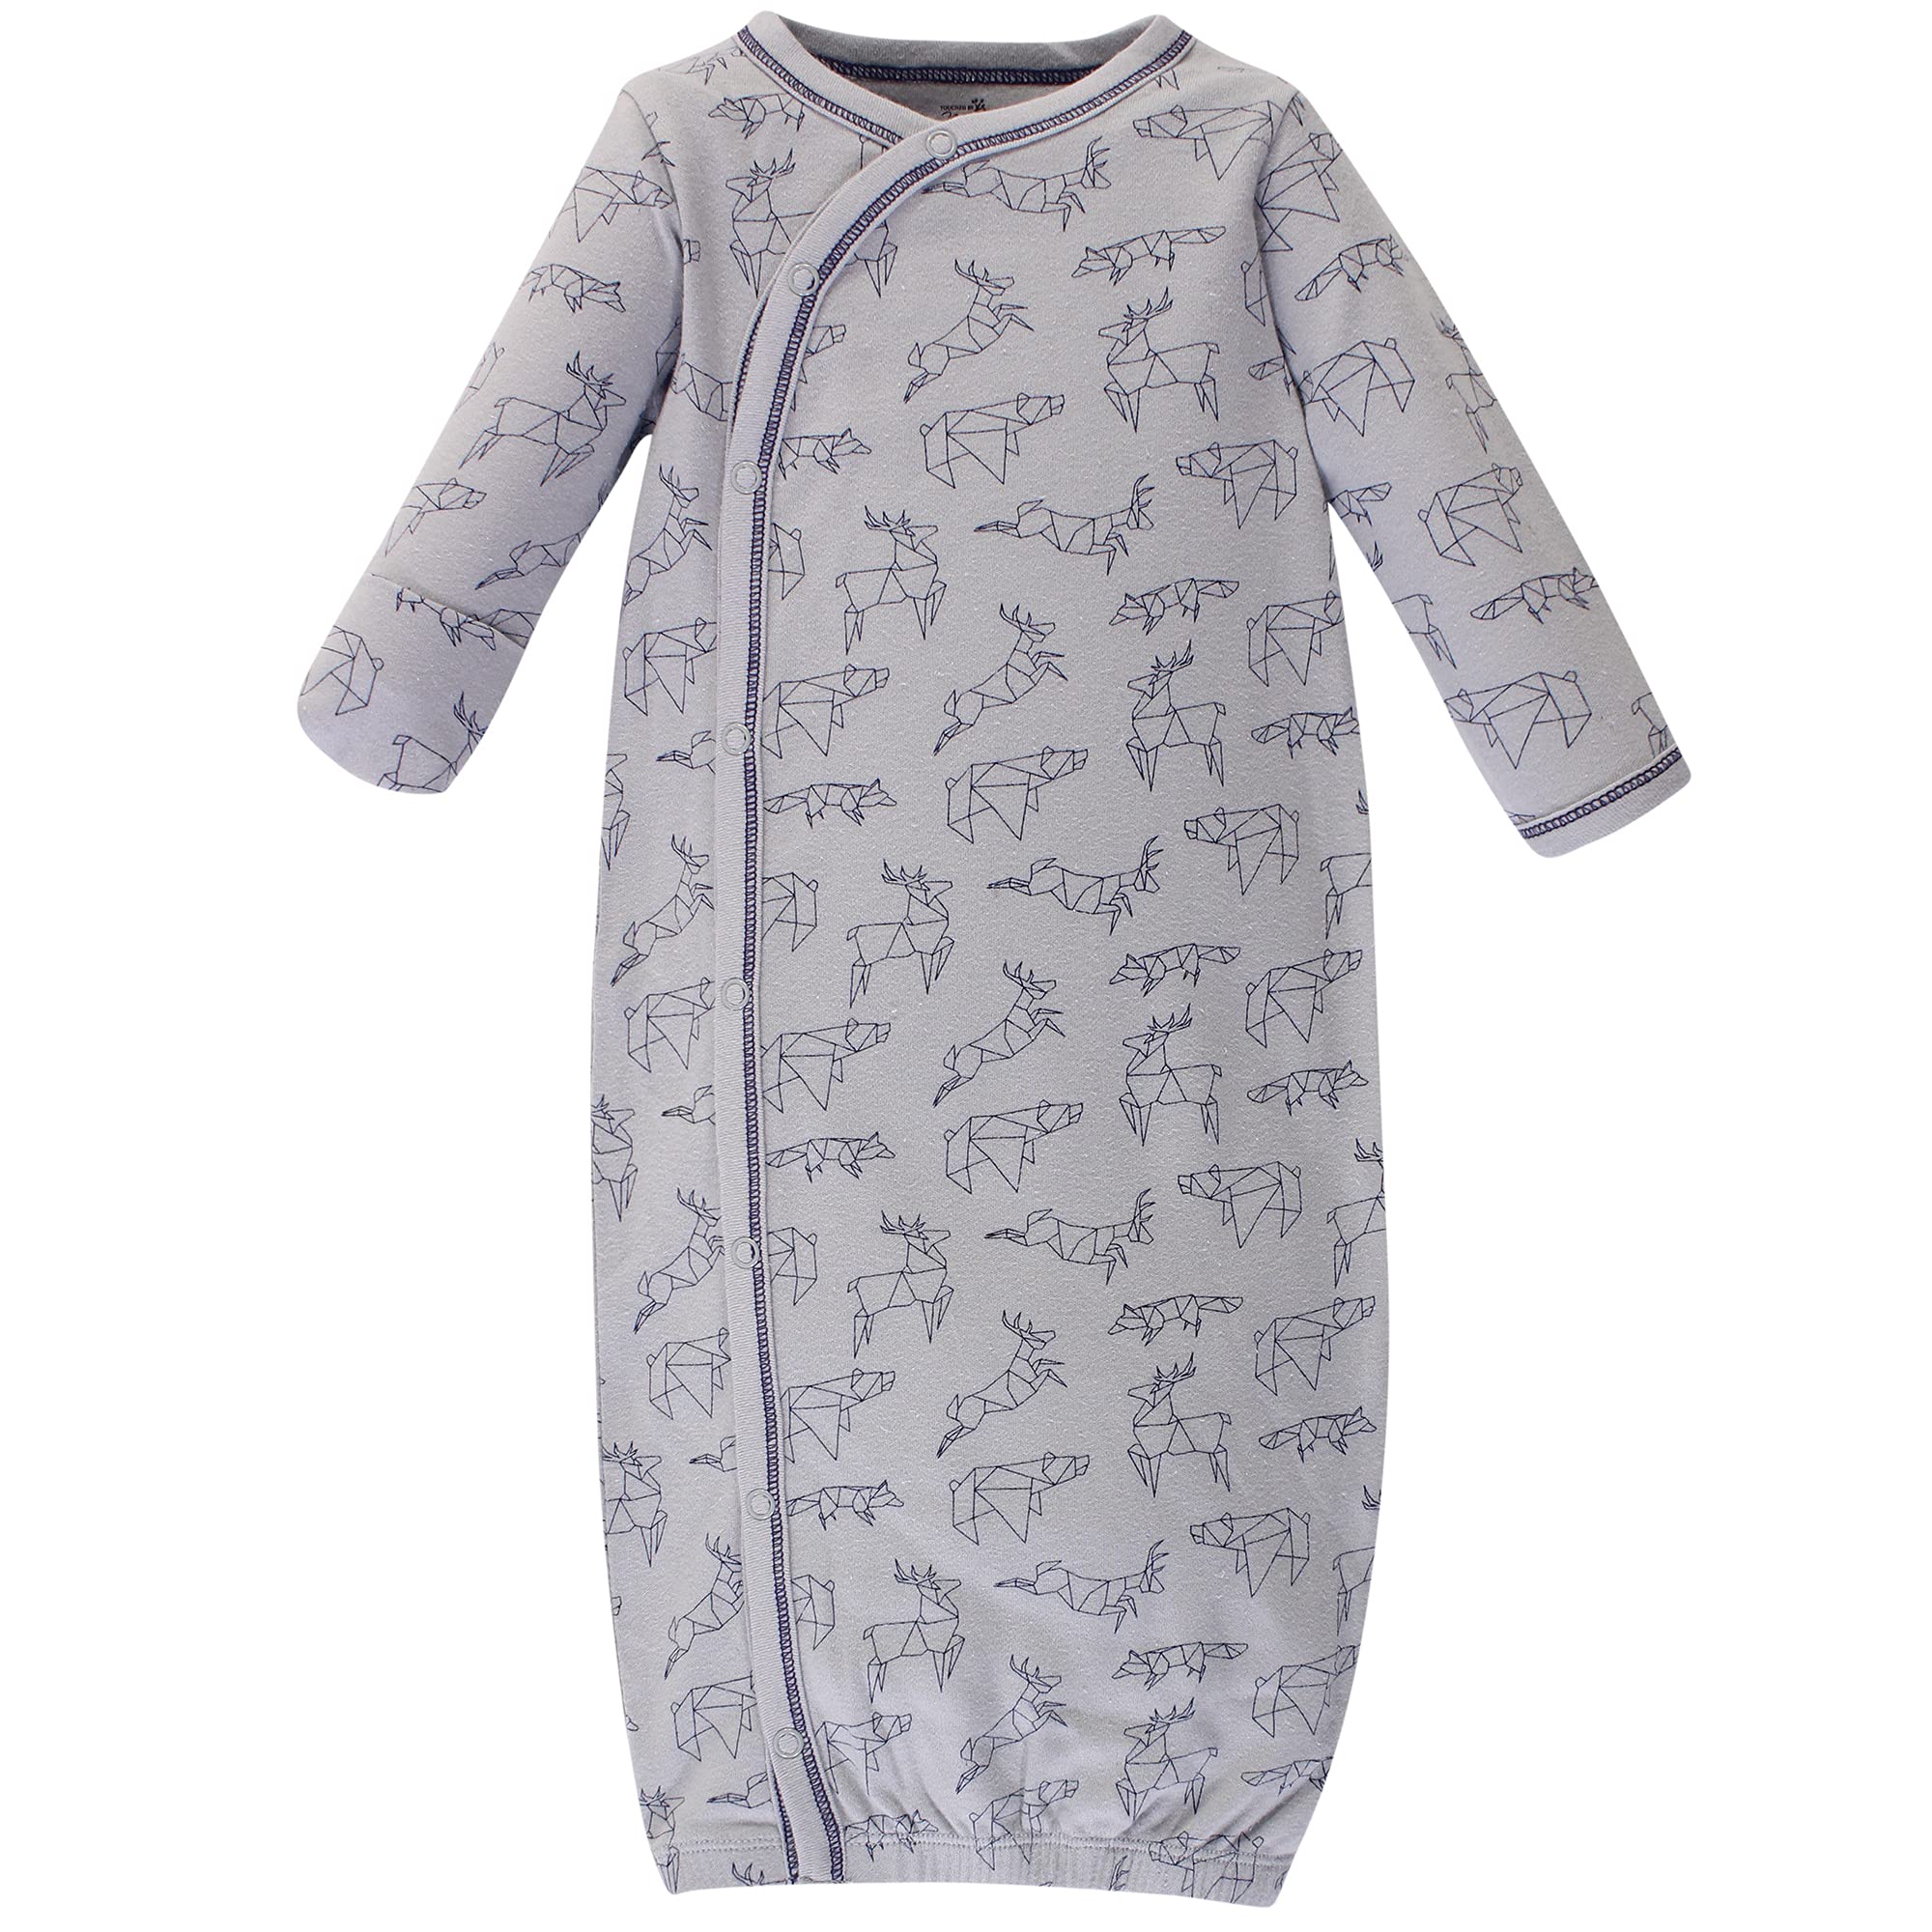 Touched by Nature Baby Girls' Organic Cotton Kimono Gowns